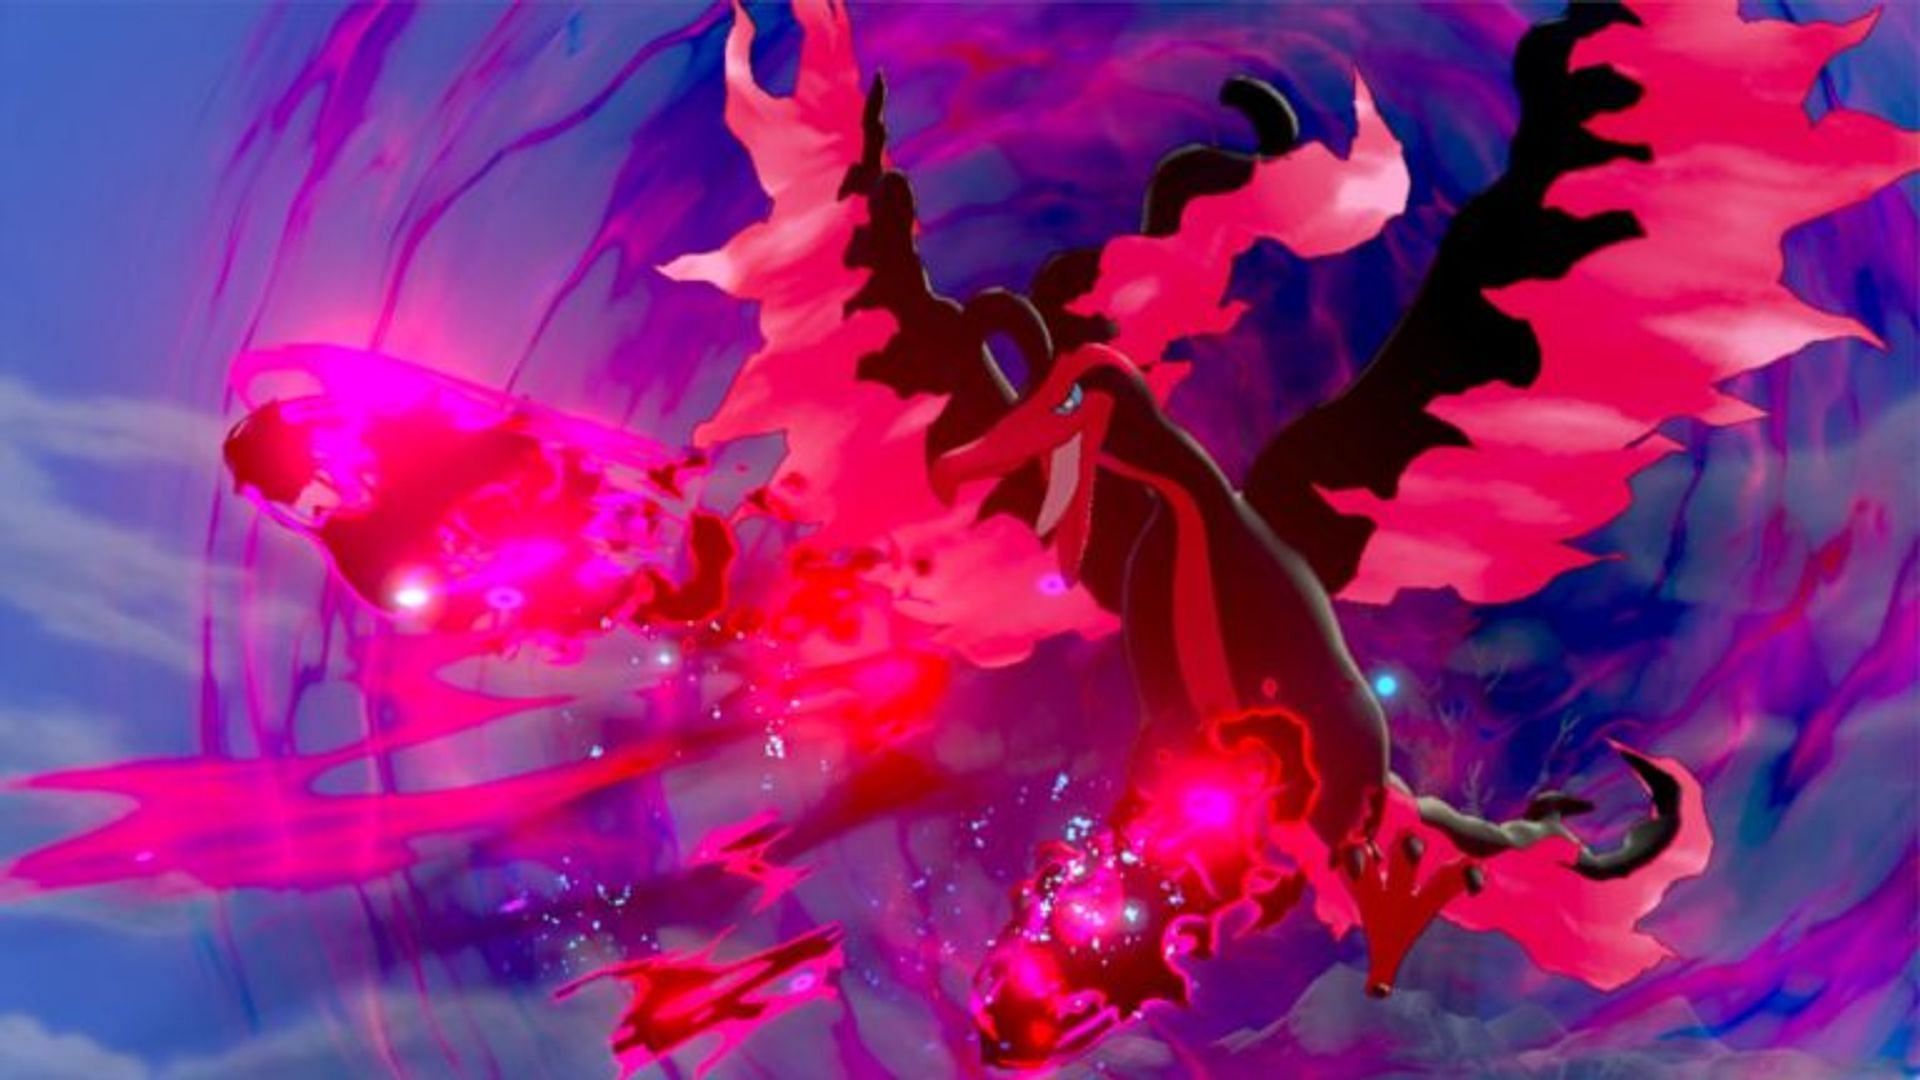 Galarian Moltres as it appears in Pokemon Sword and Shield (Image via The Pokemon Company)